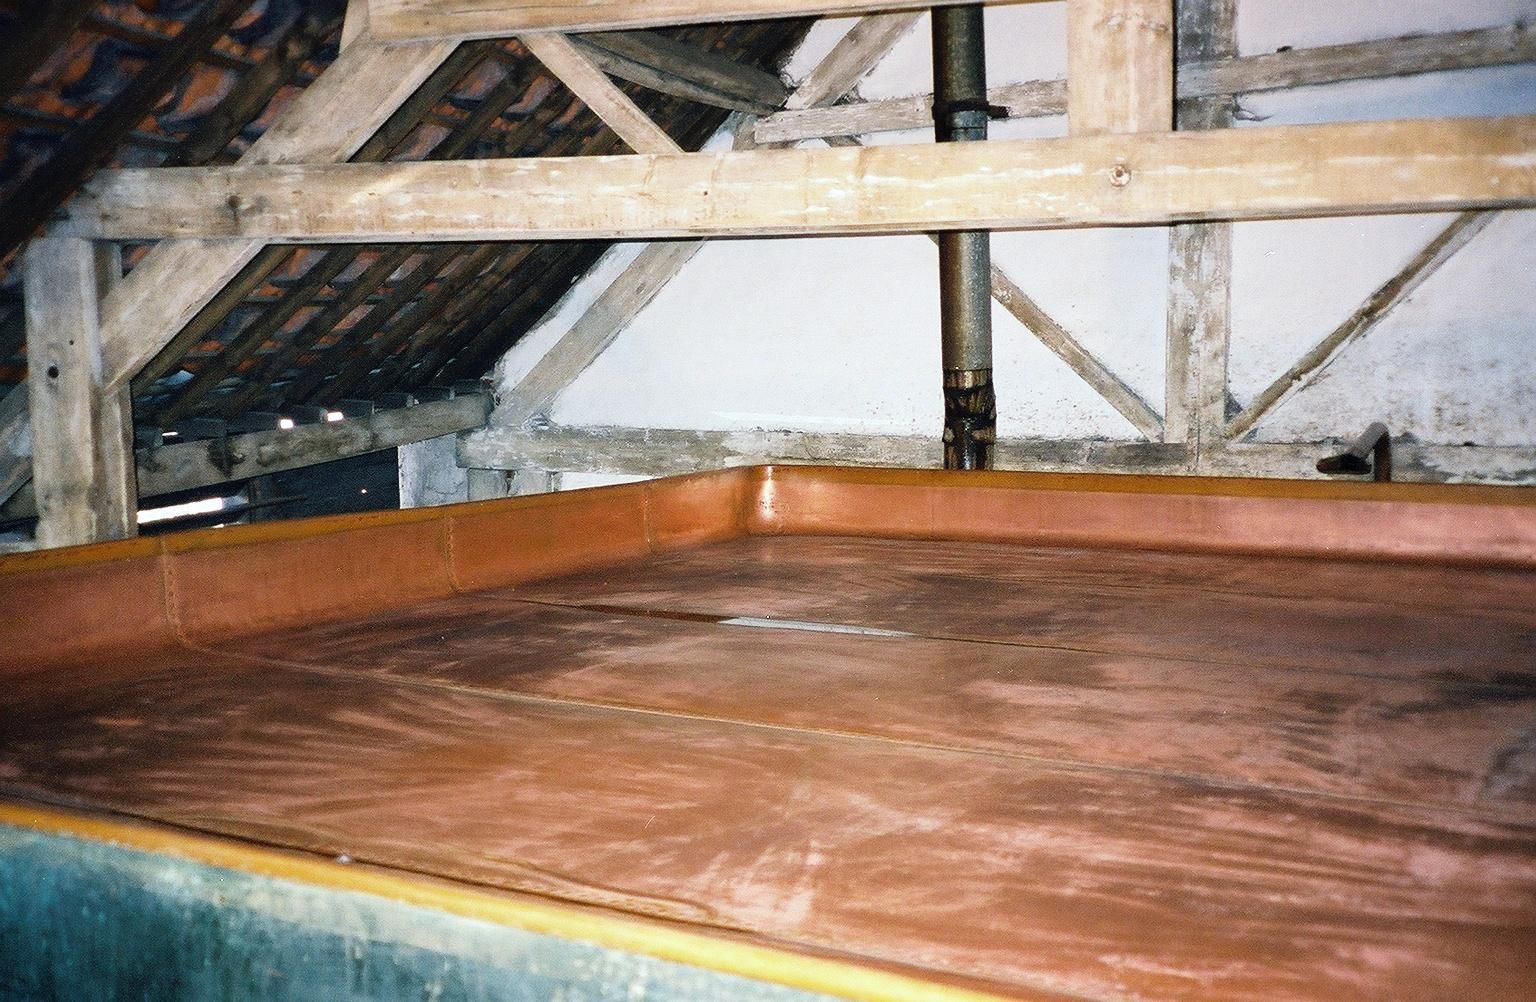 Cooling Tun at Cantillon Brewery in Brussels. My own photo.